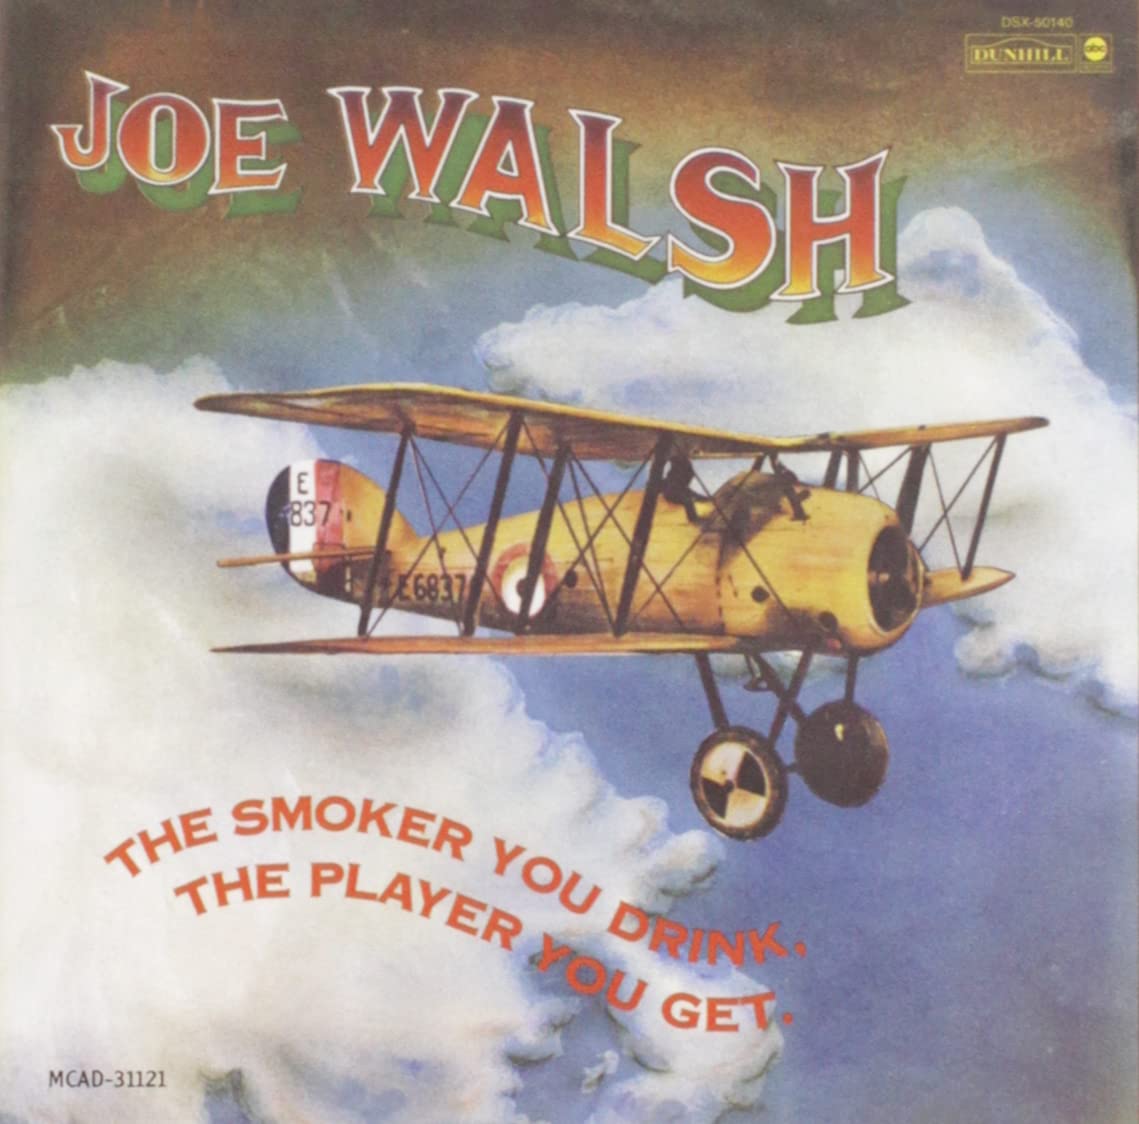 Walsh, Joe - The Smoker You Drink, The Player You Get  cover